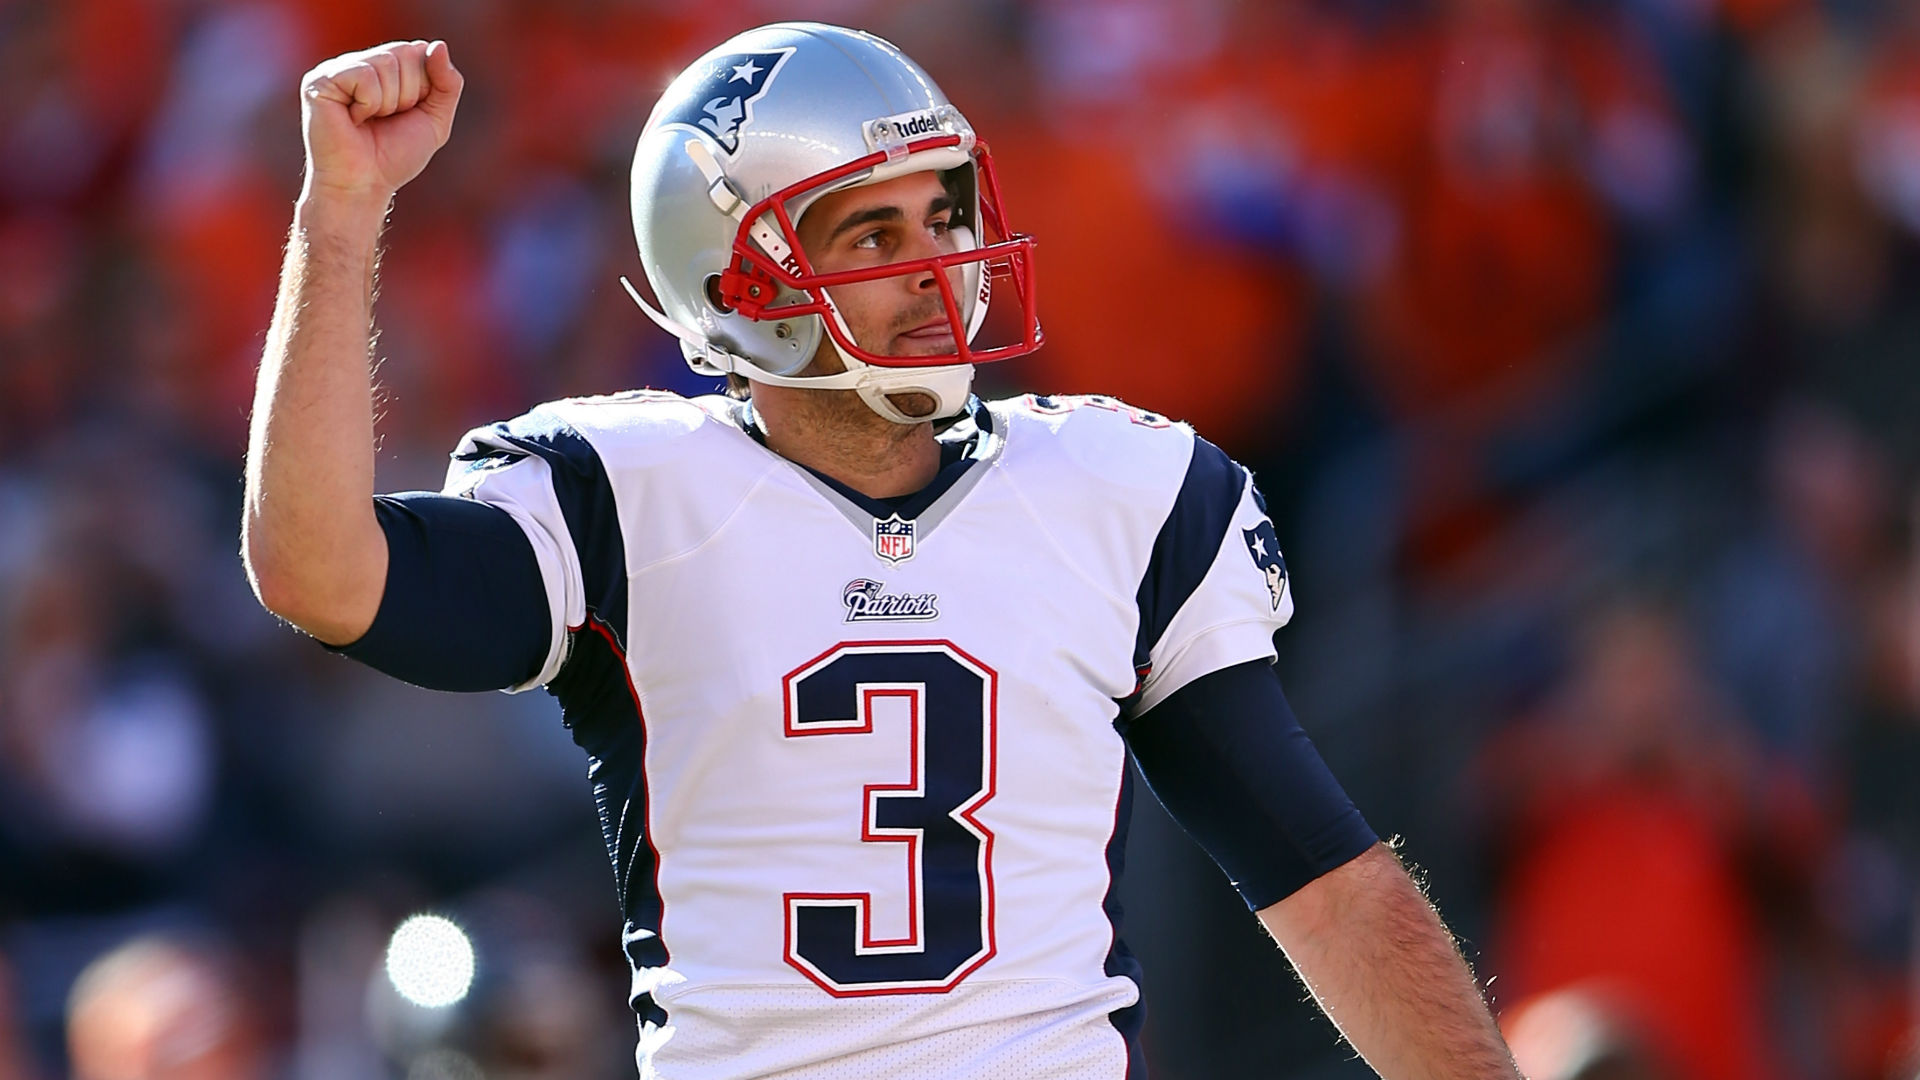 The New England Patriots announced the deal on Wednesday, with Stephen Gostkowski reportedly signing a two-year contract.